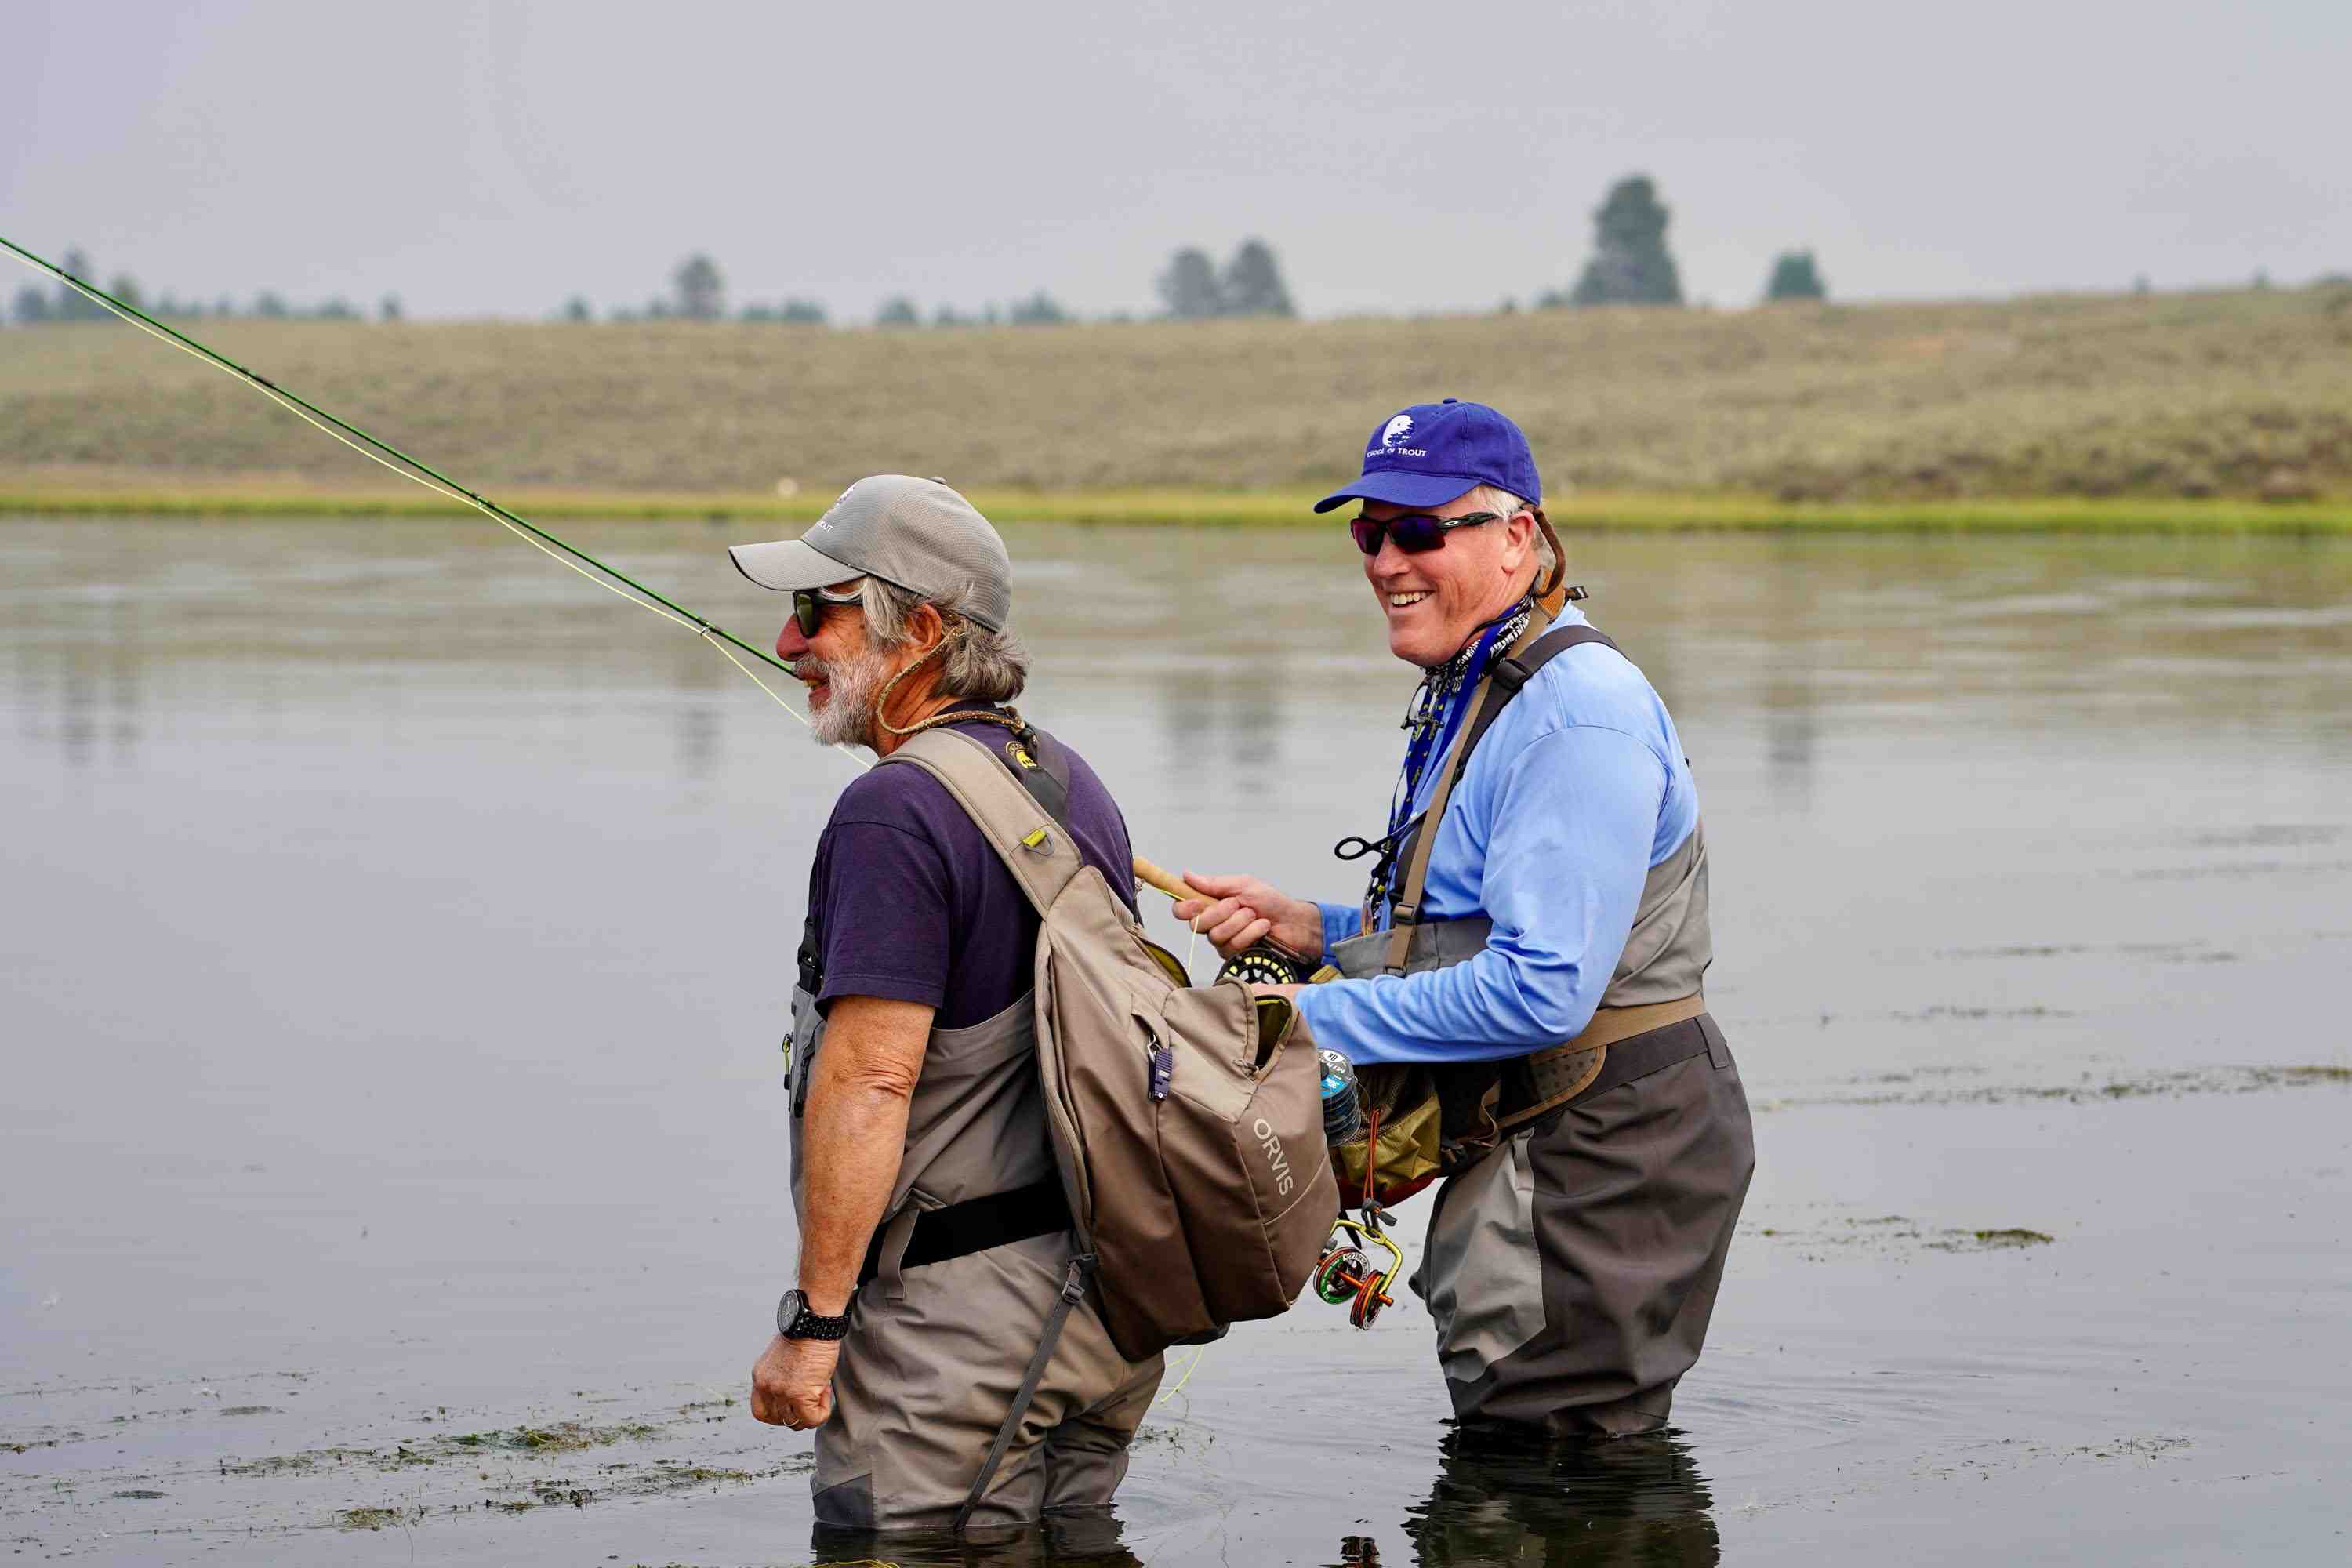 Inaugural Fly Fishing & Water Adventure Camp Provides Outdoor